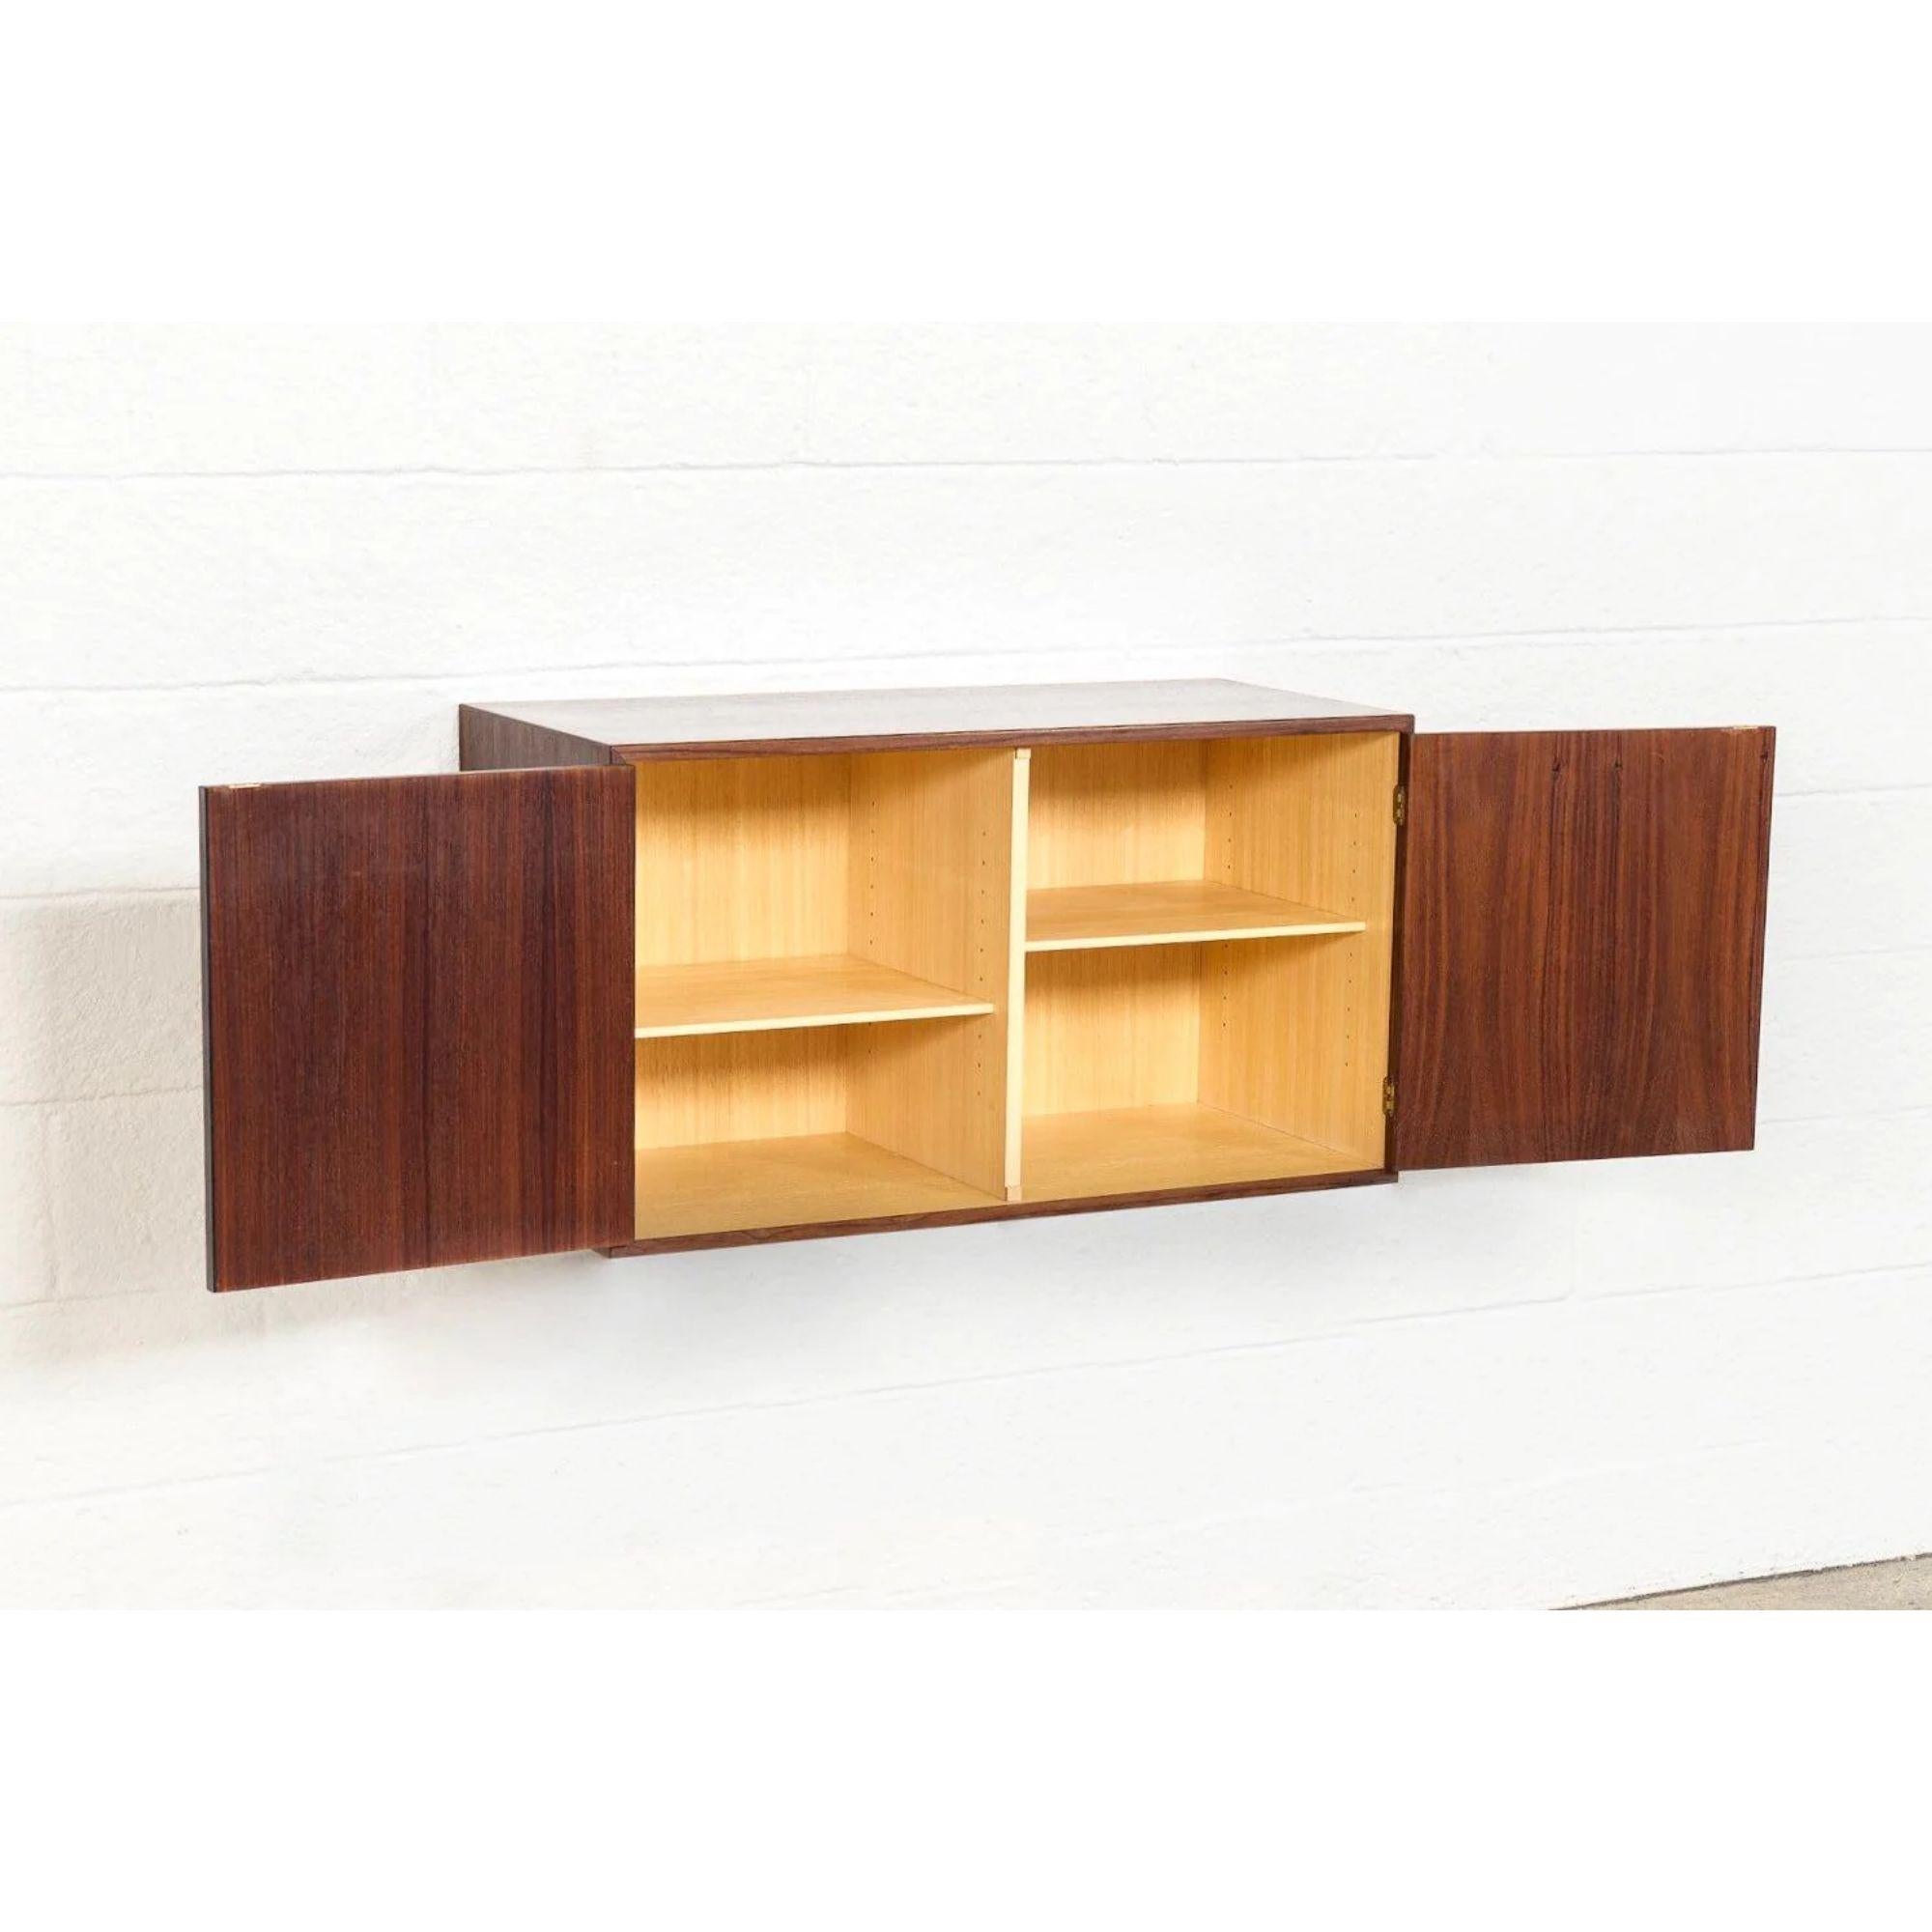 Midcentury Danish Rosewood Wall Mounted Cabinet or Floating Shelf In Good Condition For Sale In Detroit, MI